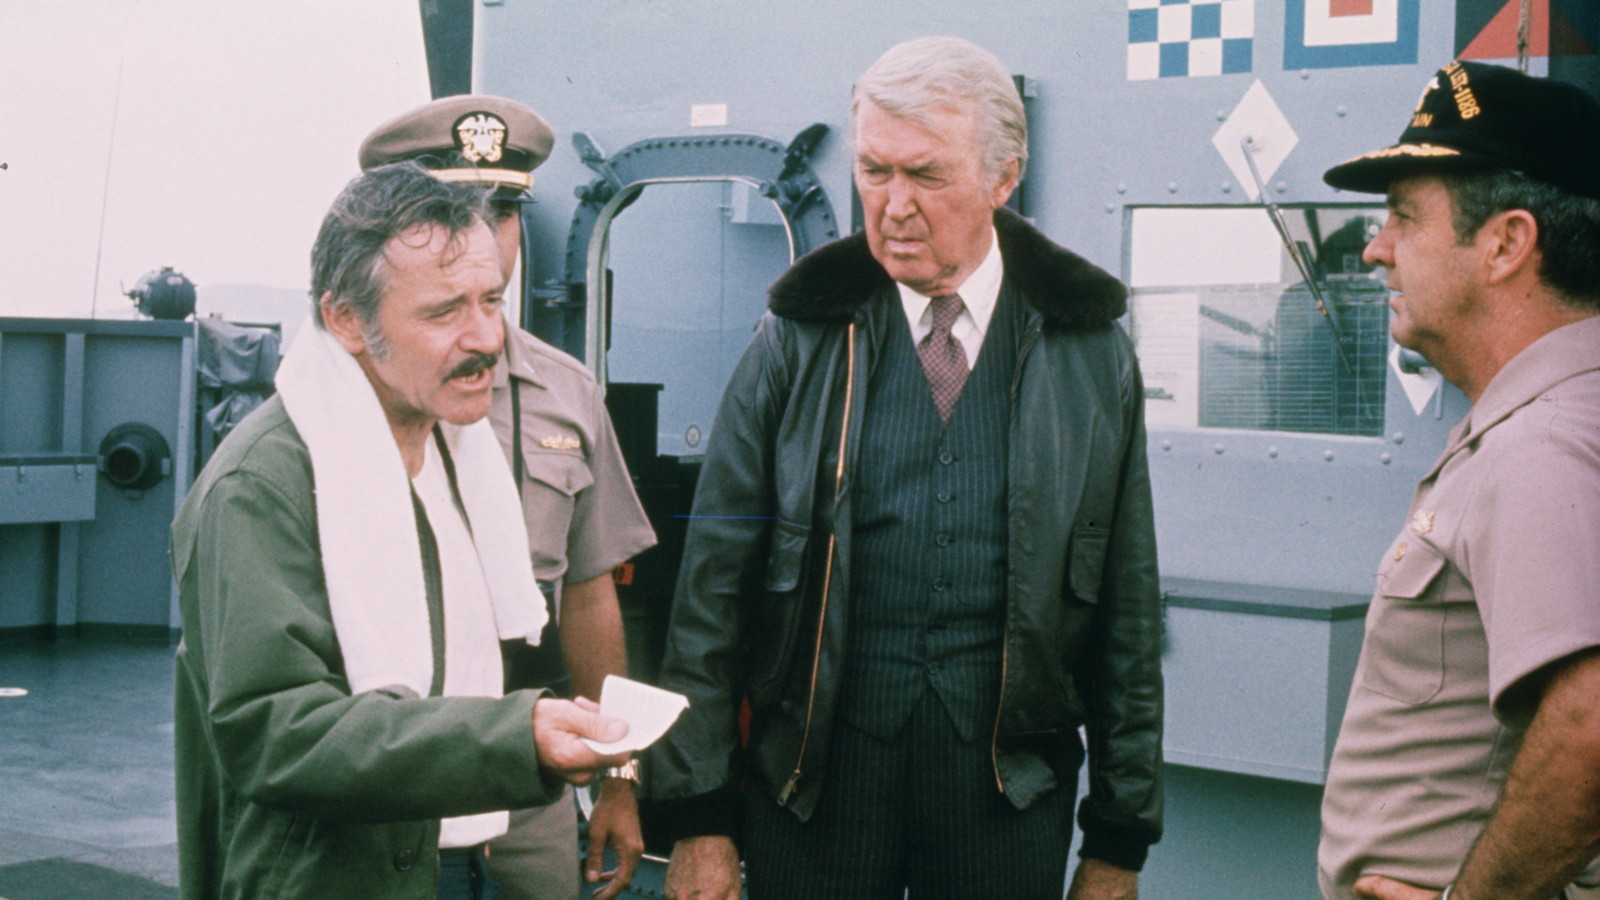 "Airport '77" was one of the many movies and TV shows that added to the alllure and mystery of the Bermuda Triangle.